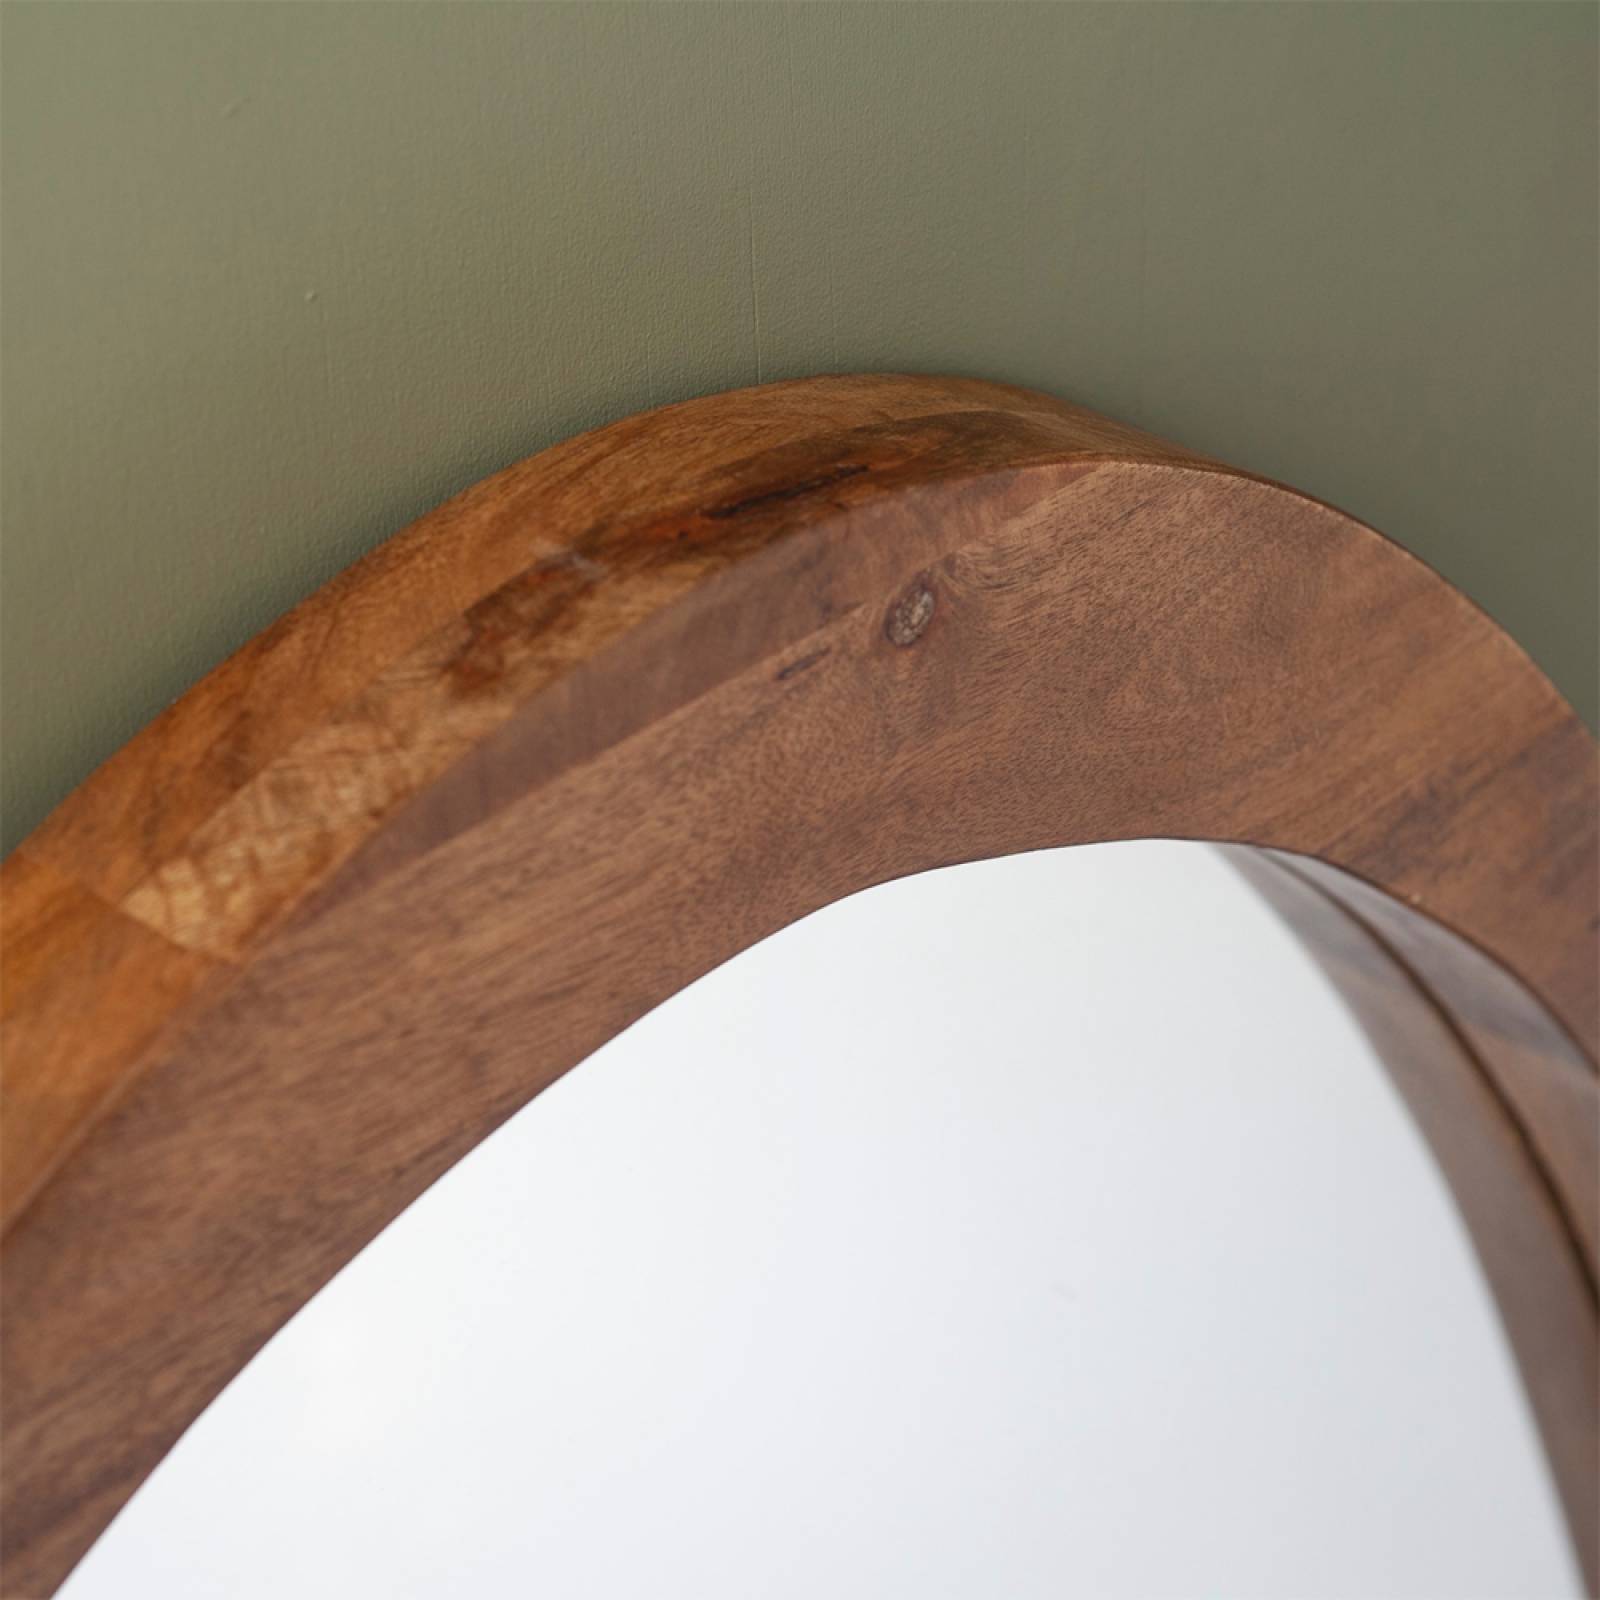 Small Organic Shaped Mirror With Wooden Back thumbnails